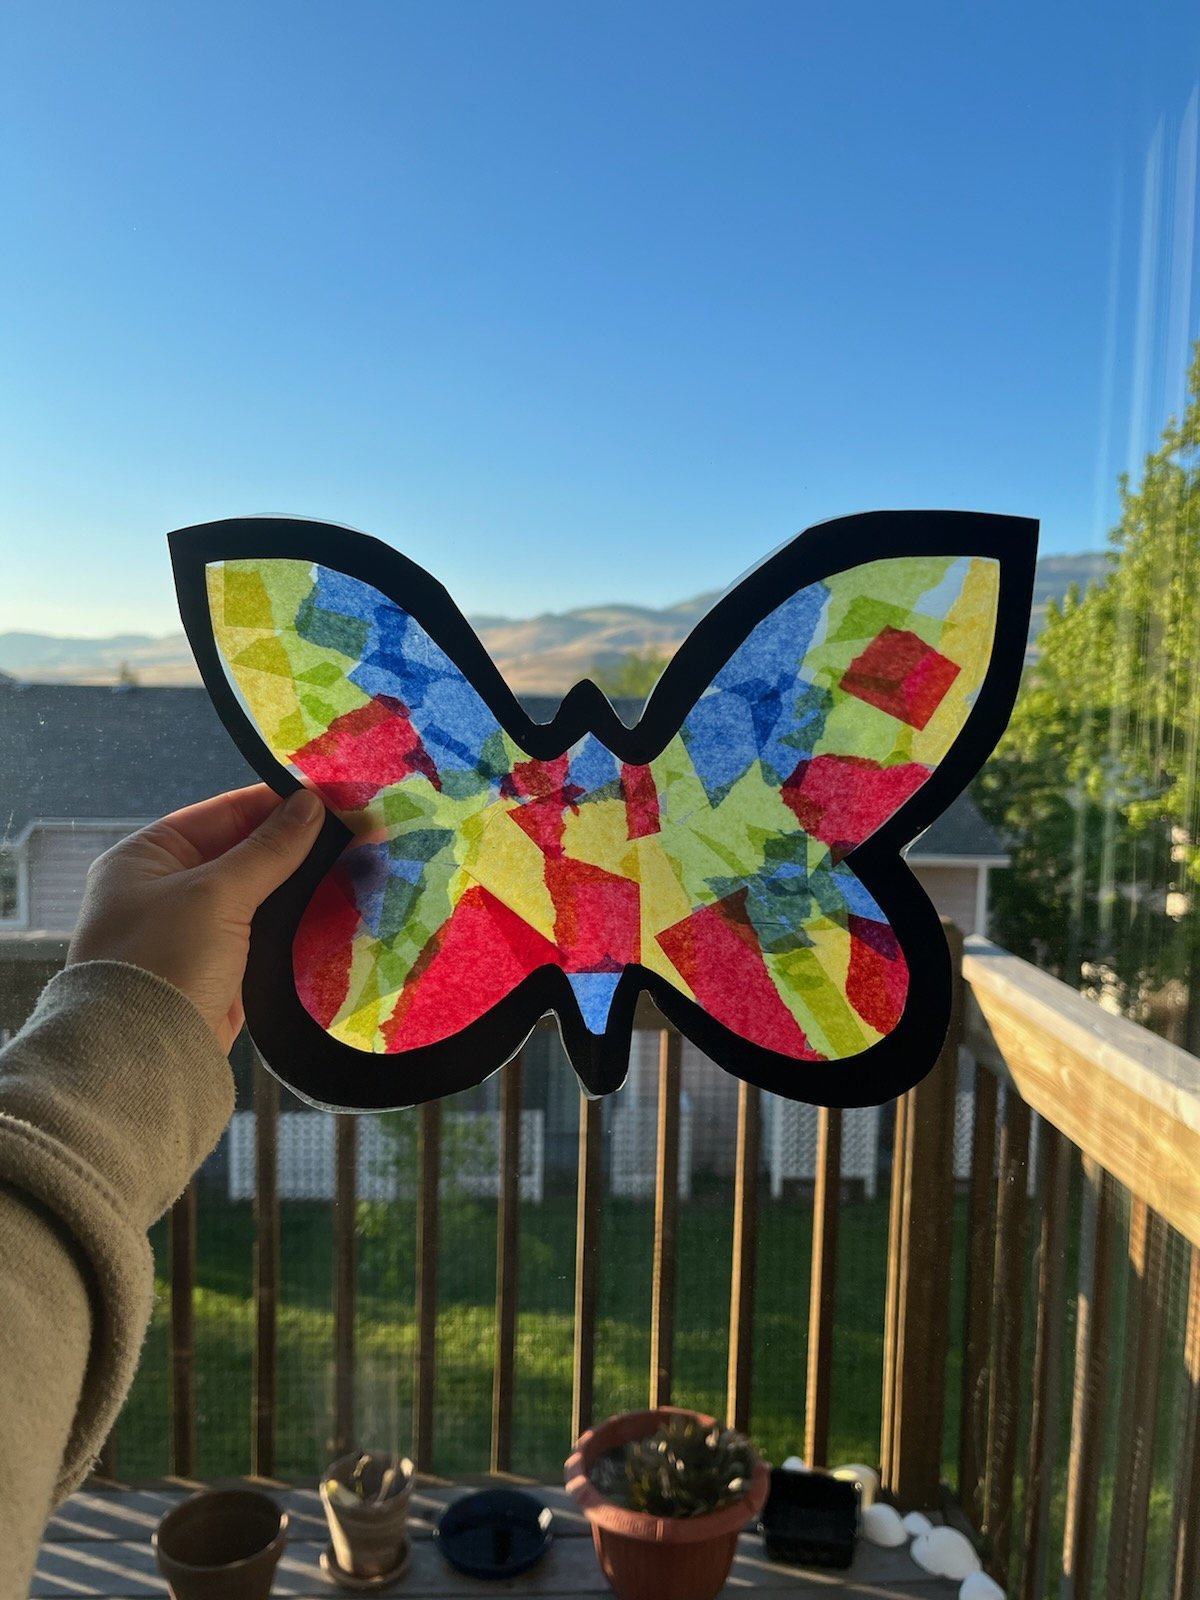  After learning all about butterflies, younger campers had the chance to make their very own in this “stained glass” craft 